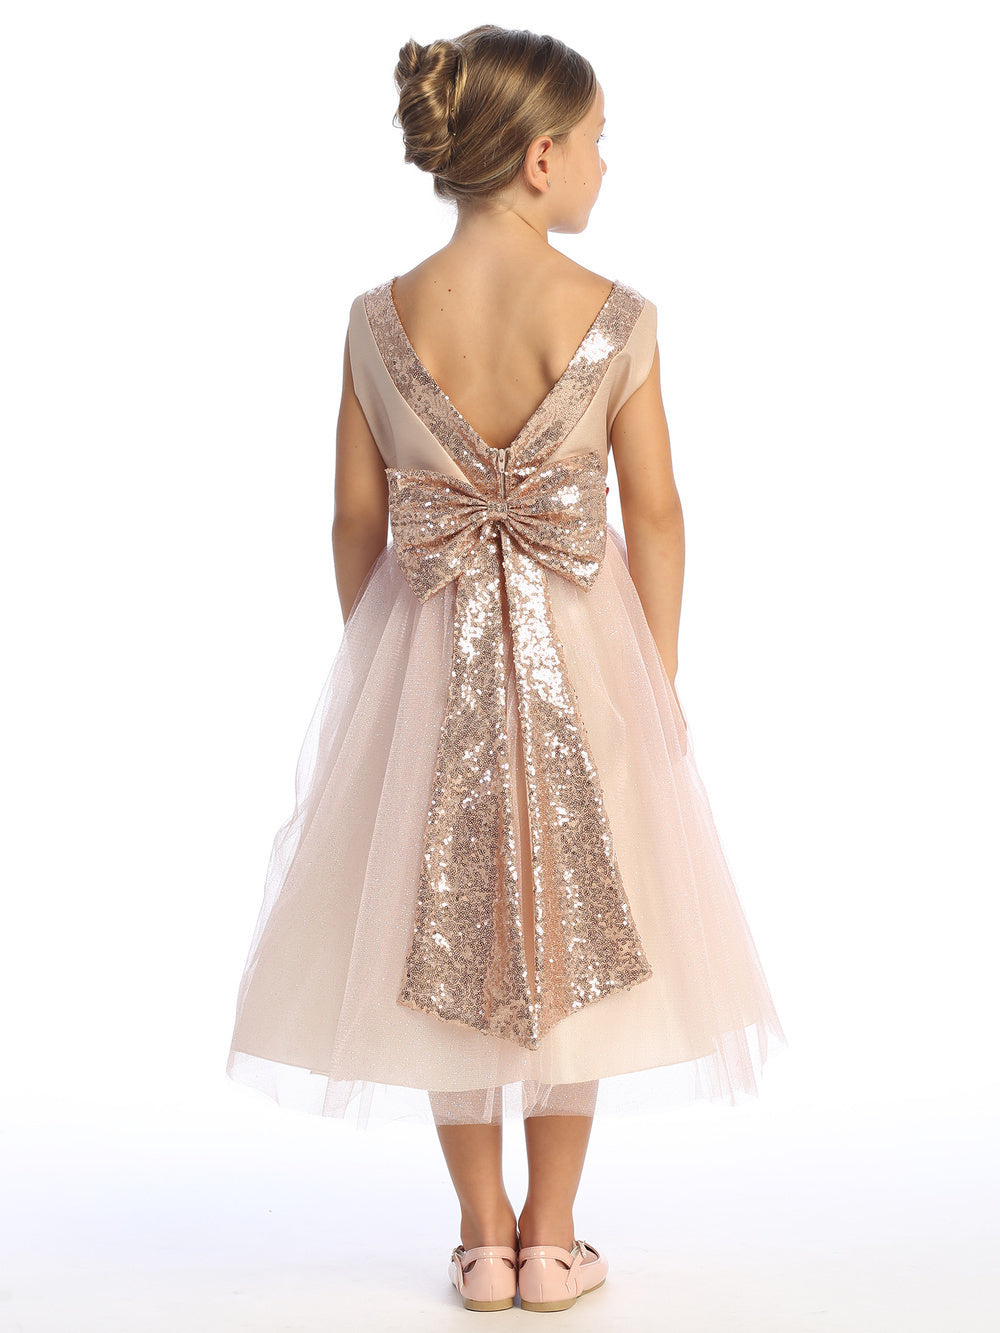 Blush shantung dress with sparkle tulle and sequins, a pastel dream for a flower girl.